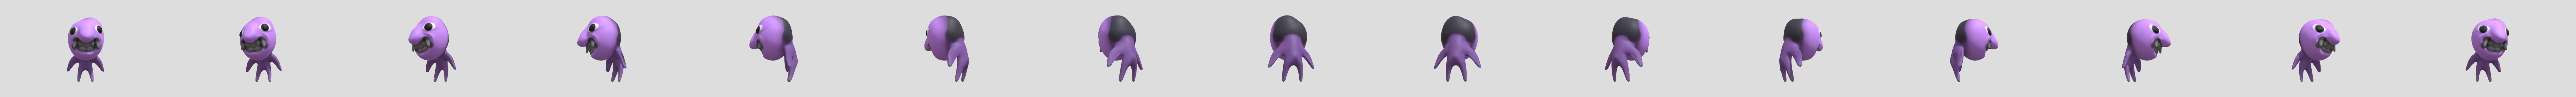 4sby on X: Ao Oni Head #3dart #3dmodeling #AoOni   / X